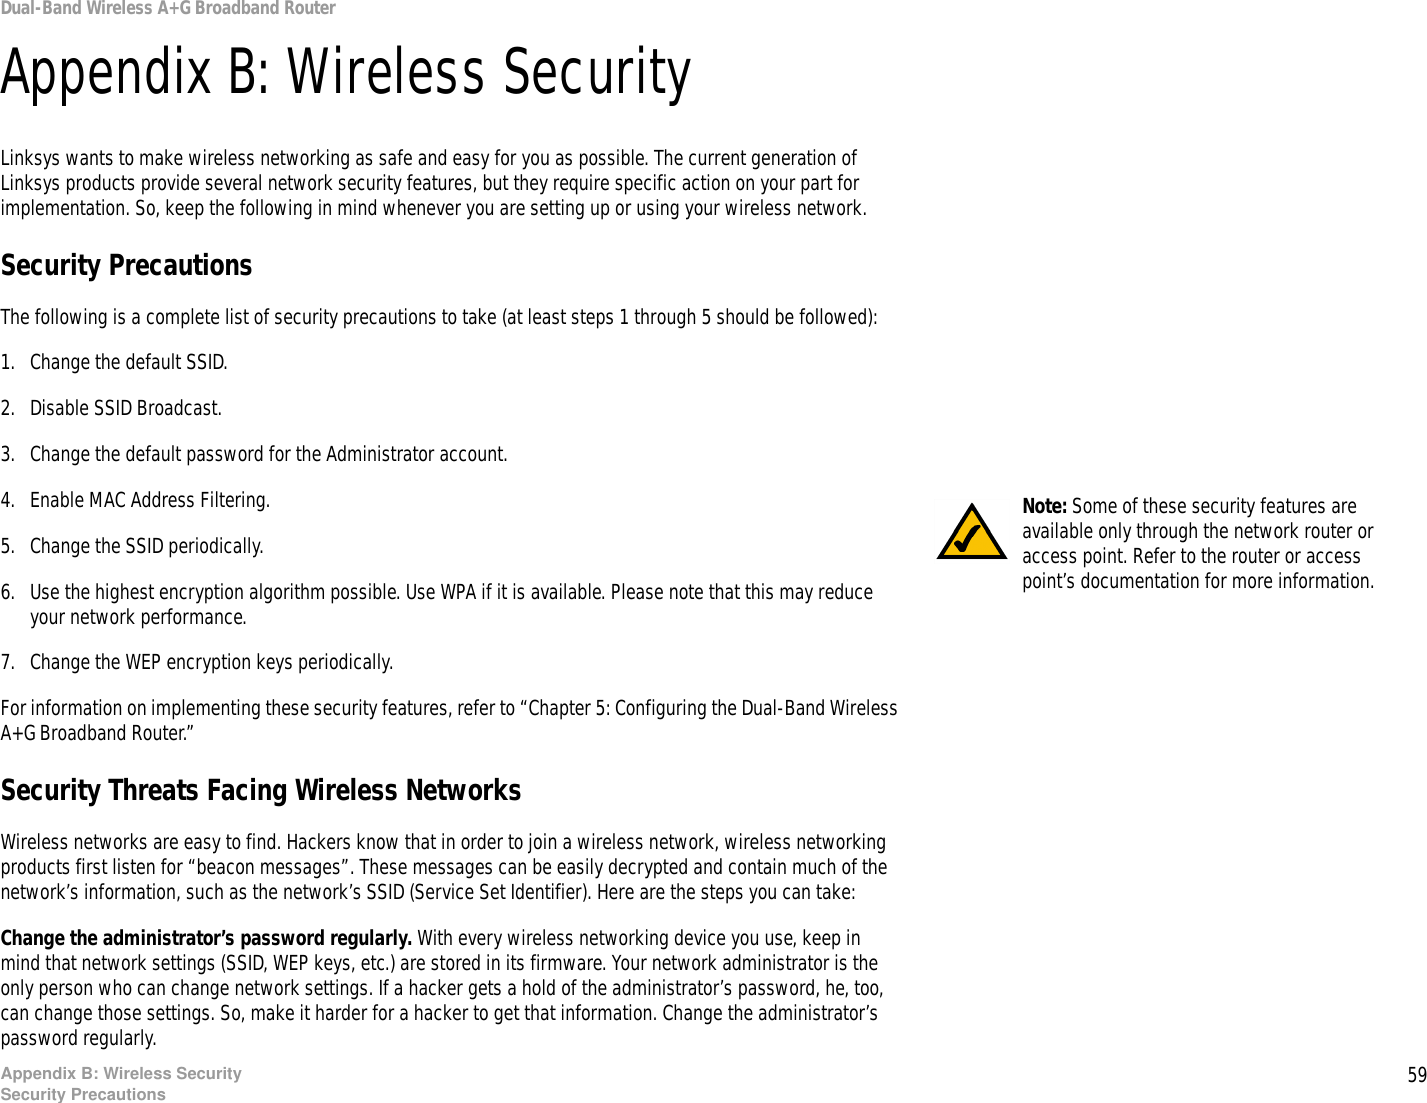 59Appendix B: Wireless SecuritySecurity PrecautionsDual-Band Wireless A+G Broadband RouterAppendix B: Wireless SecurityLinksys wants to make wireless networking as safe and easy for you as possible. The current generation of Linksys products provide several network security features, but they require specific action on your part for implementation. So, keep the following in mind whenever you are setting up or using your wireless network.Security PrecautionsThe following is a complete list of security precautions to take (at least steps 1 through 5 should be followed):1. Change the default SSID. 2. Disable SSID Broadcast. 3. Change the default password for the Administrator account. 4. Enable MAC Address Filtering. 5. Change the SSID periodically. 6. Use the highest encryption algorithm possible. Use WPA if it is available. Please note that this may reduce your network performance. 7. Change the WEP encryption keys periodically. For information on implementing these security features, refer to “Chapter 5: Configuring the Dual-Band Wireless A+G Broadband Router.”Security Threats Facing Wireless Networks Wireless networks are easy to find. Hackers know that in order to join a wireless network, wireless networking products first listen for “beacon messages”. These messages can be easily decrypted and contain much of the network’s information, such as the network’s SSID (Service Set Identifier). Here are the steps you can take:Change the administrator’s password regularly. With every wireless networking device you use, keep in mind that network settings (SSID, WEP keys, etc.) are stored in its firmware. Your network administrator is the only person who can change network settings. If a hacker gets a hold of the administrator’s password, he, too, can change those settings. So, make it harder for a hacker to get that information. Change the administrator’s password regularly.Note: Some of these security features are available only through the network router or access point. Refer to the router or access point’s documentation for more information.